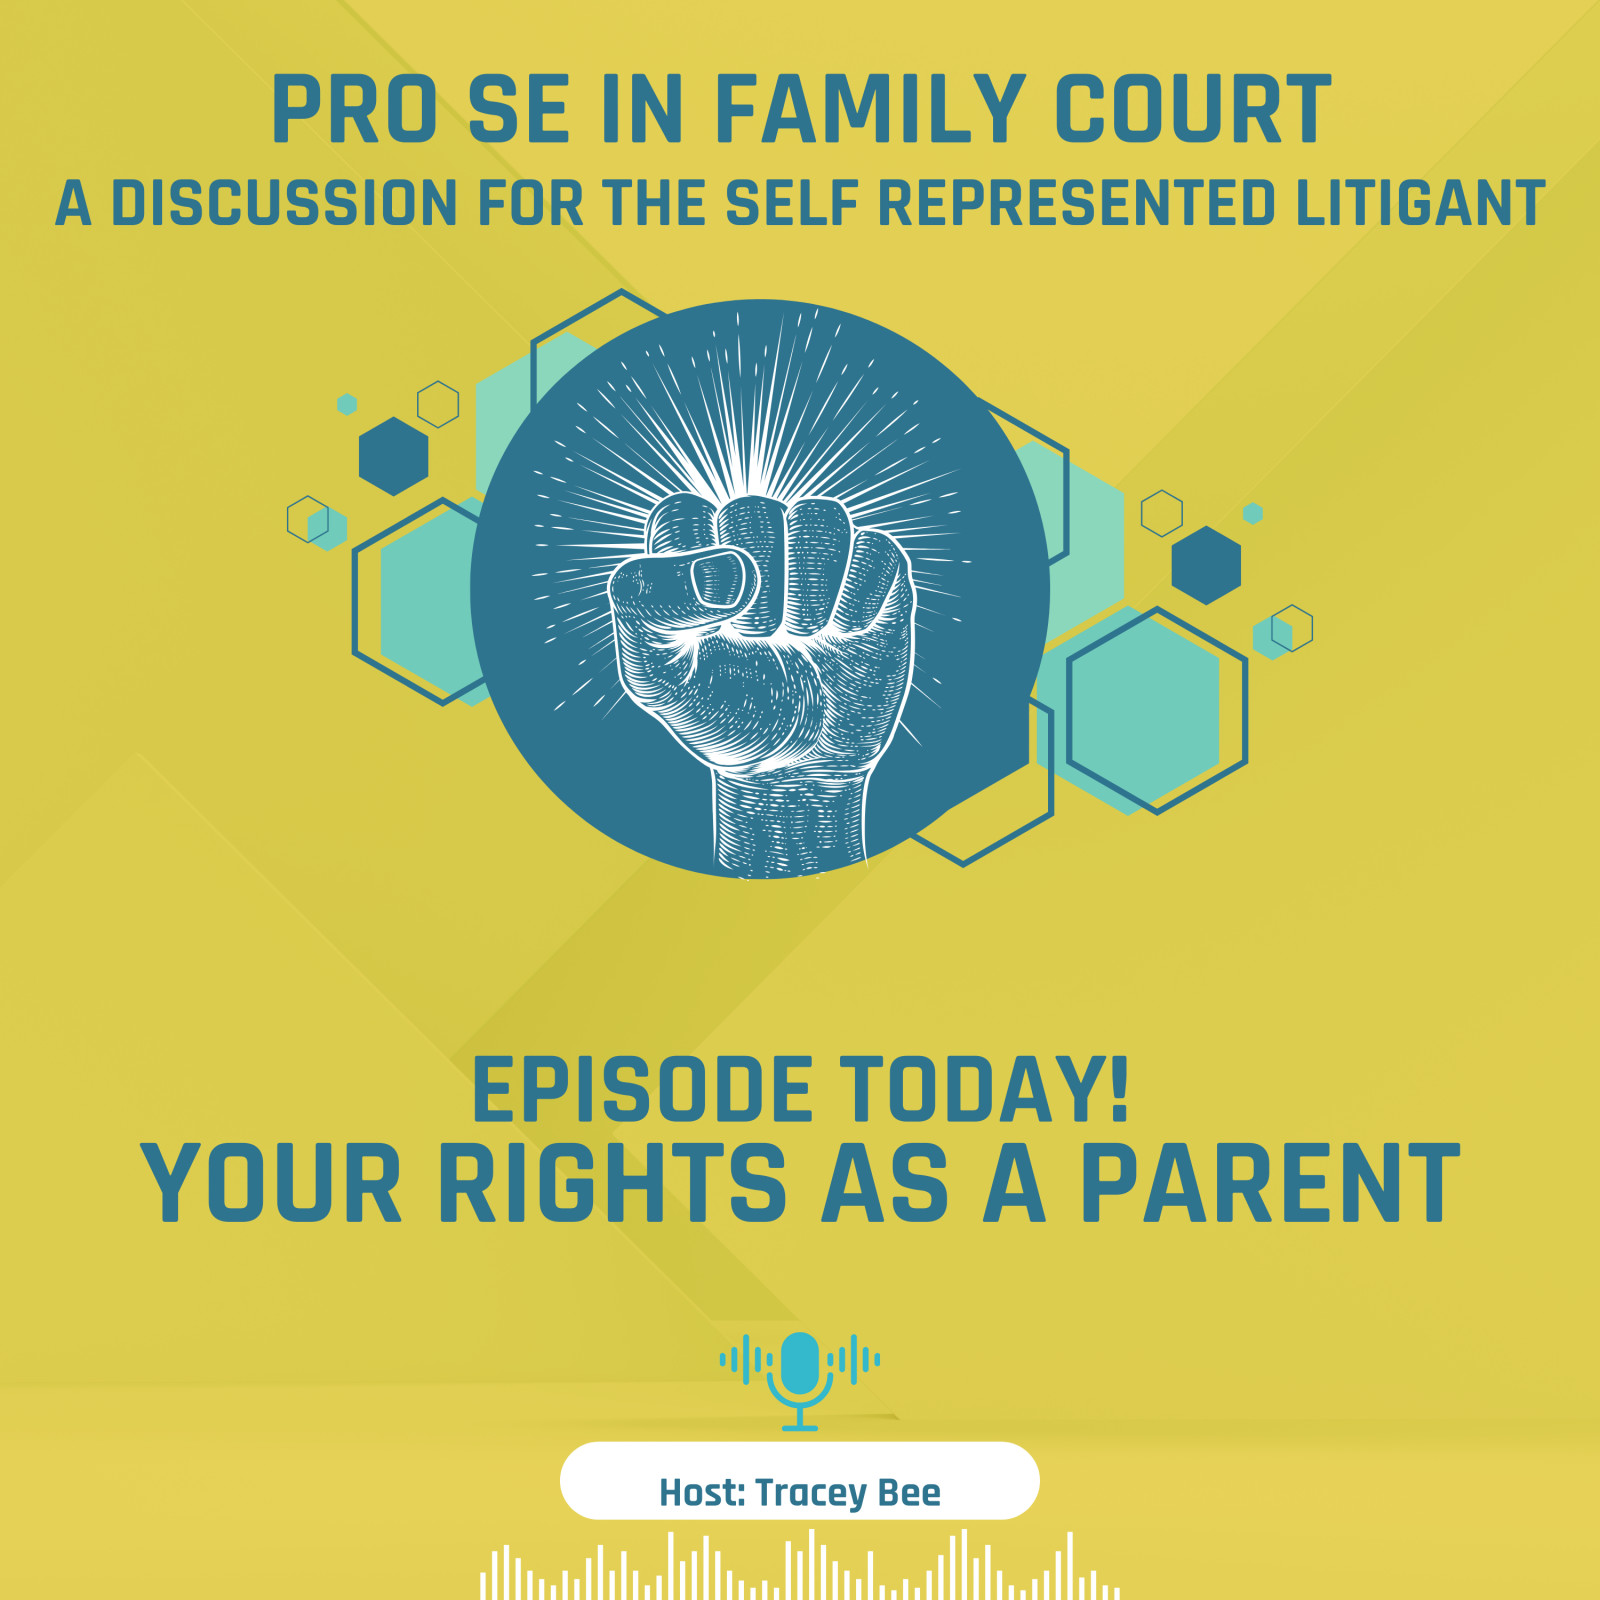 Episode 9: Your Rights as a Parent